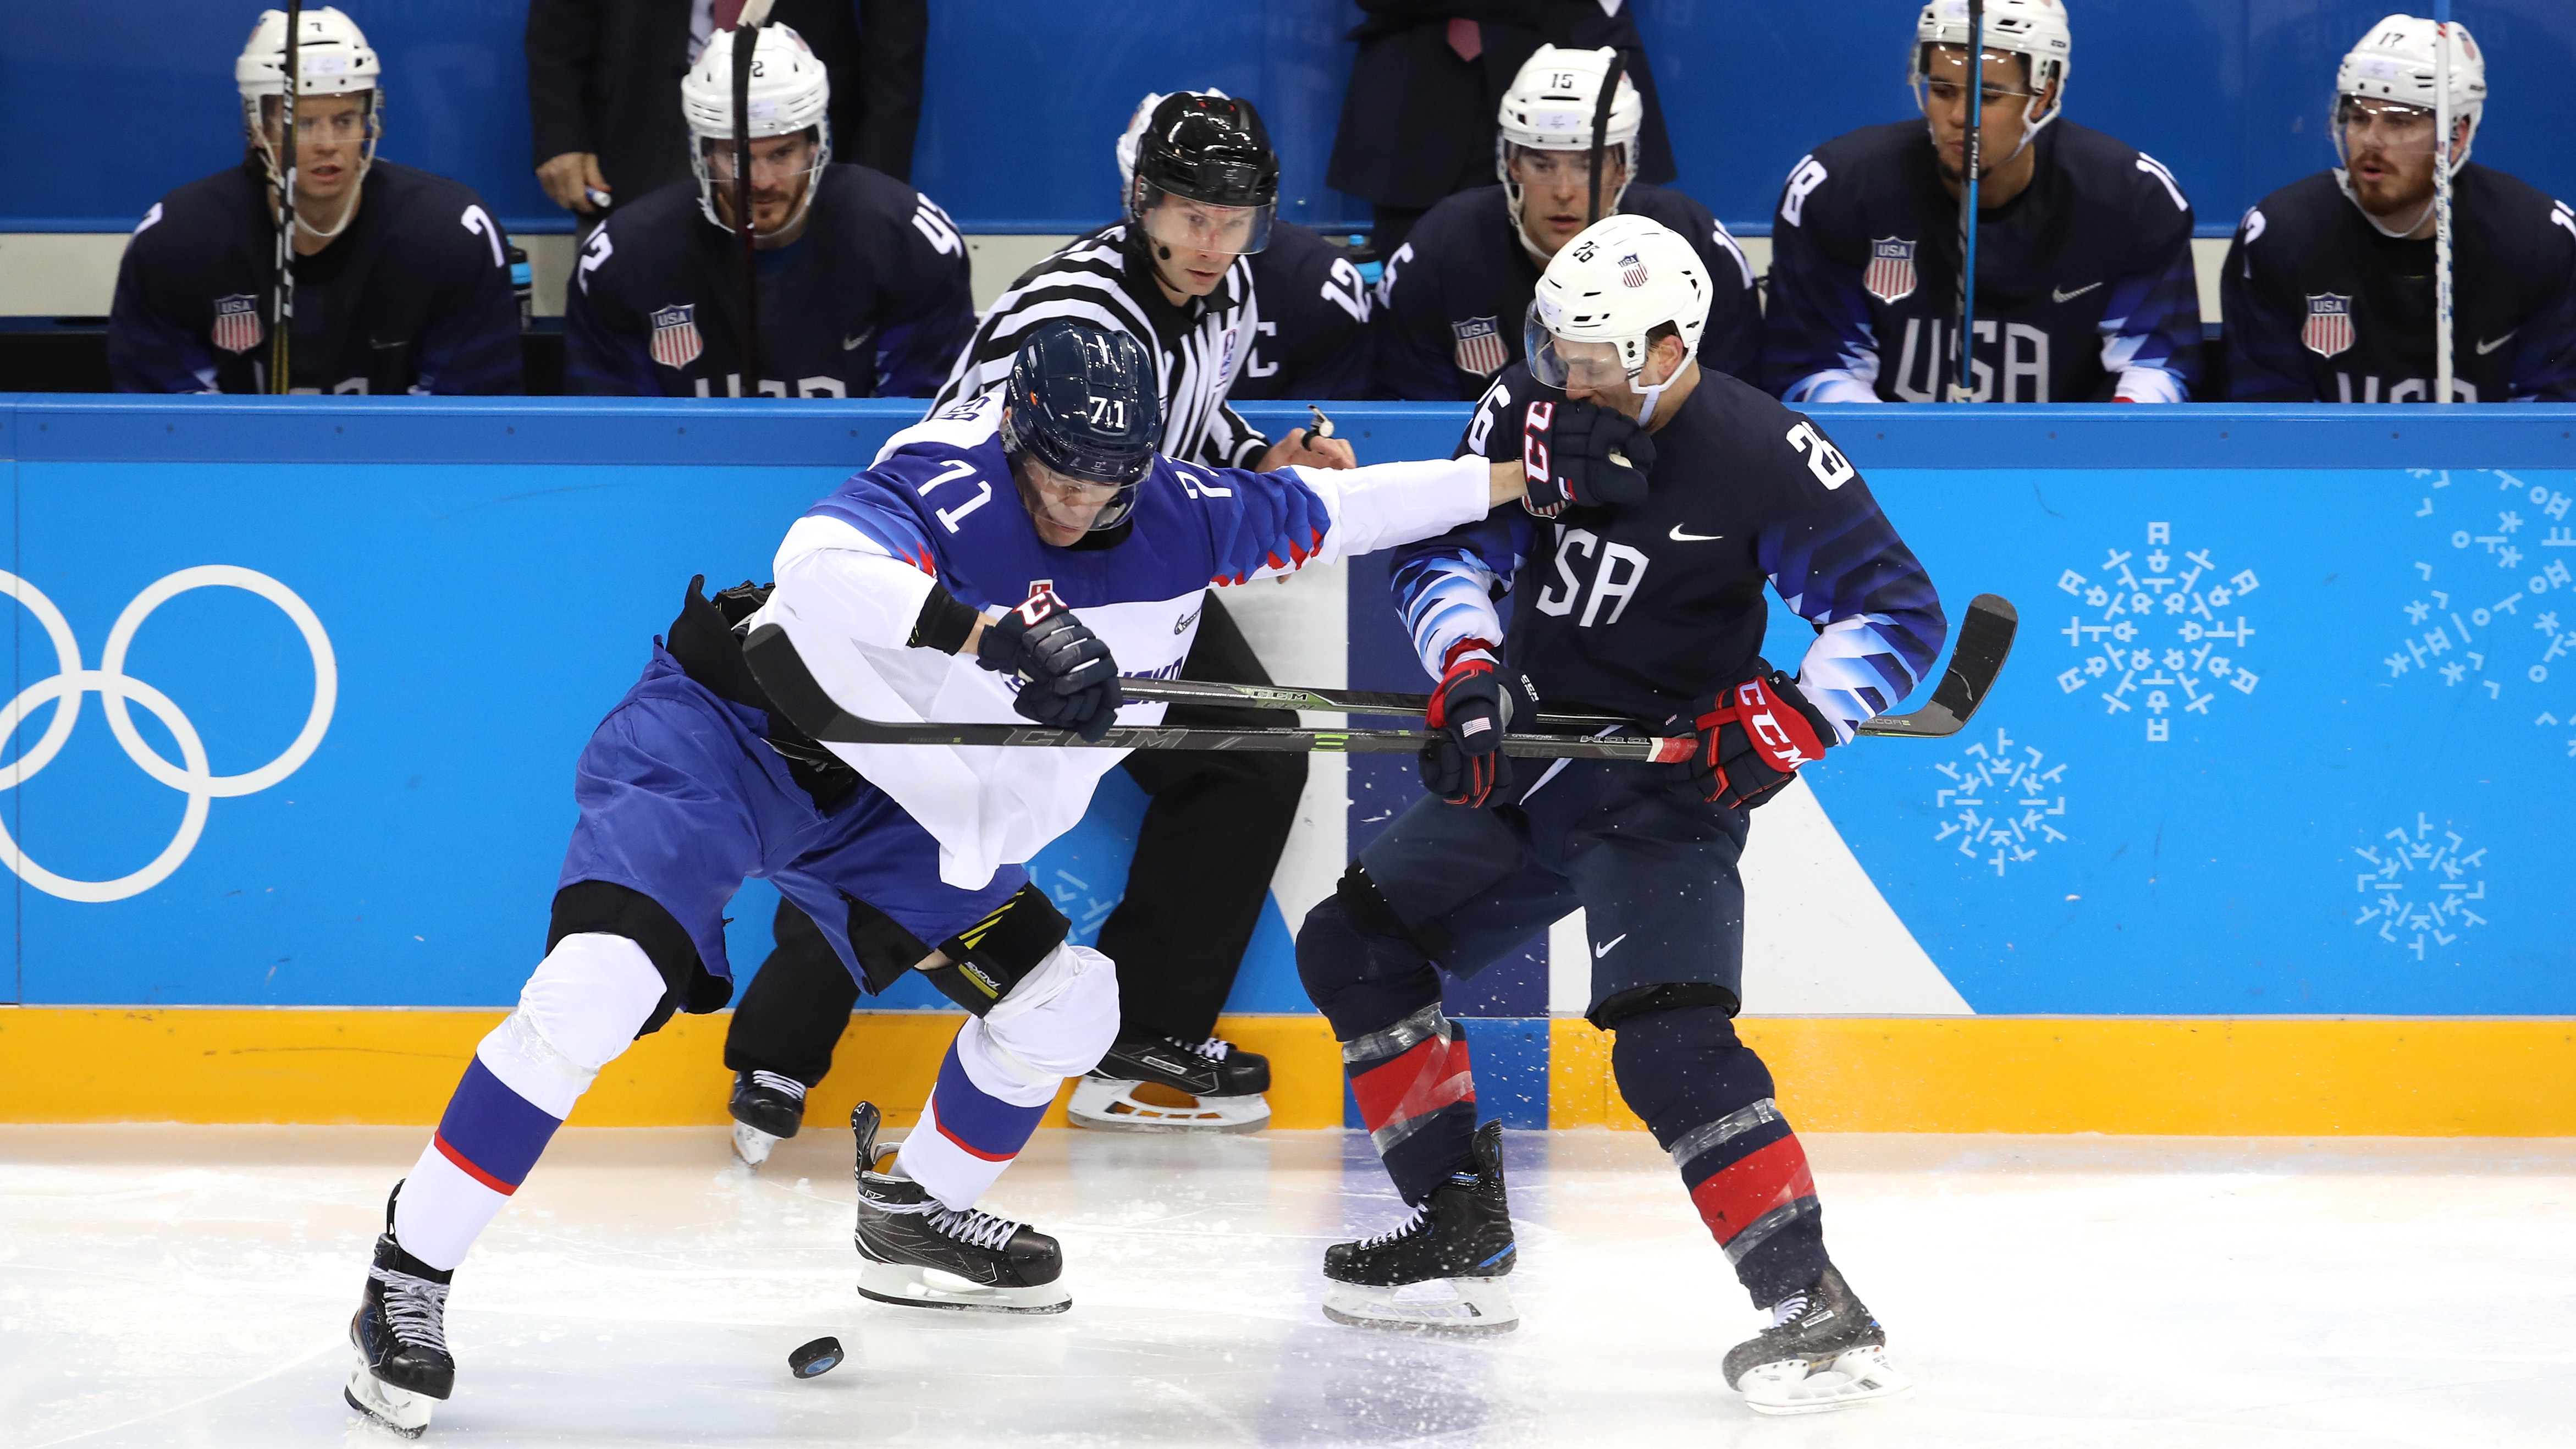 U.S. men's hockey team must play up-tempo in Winter Olympics rematch with Slovakia